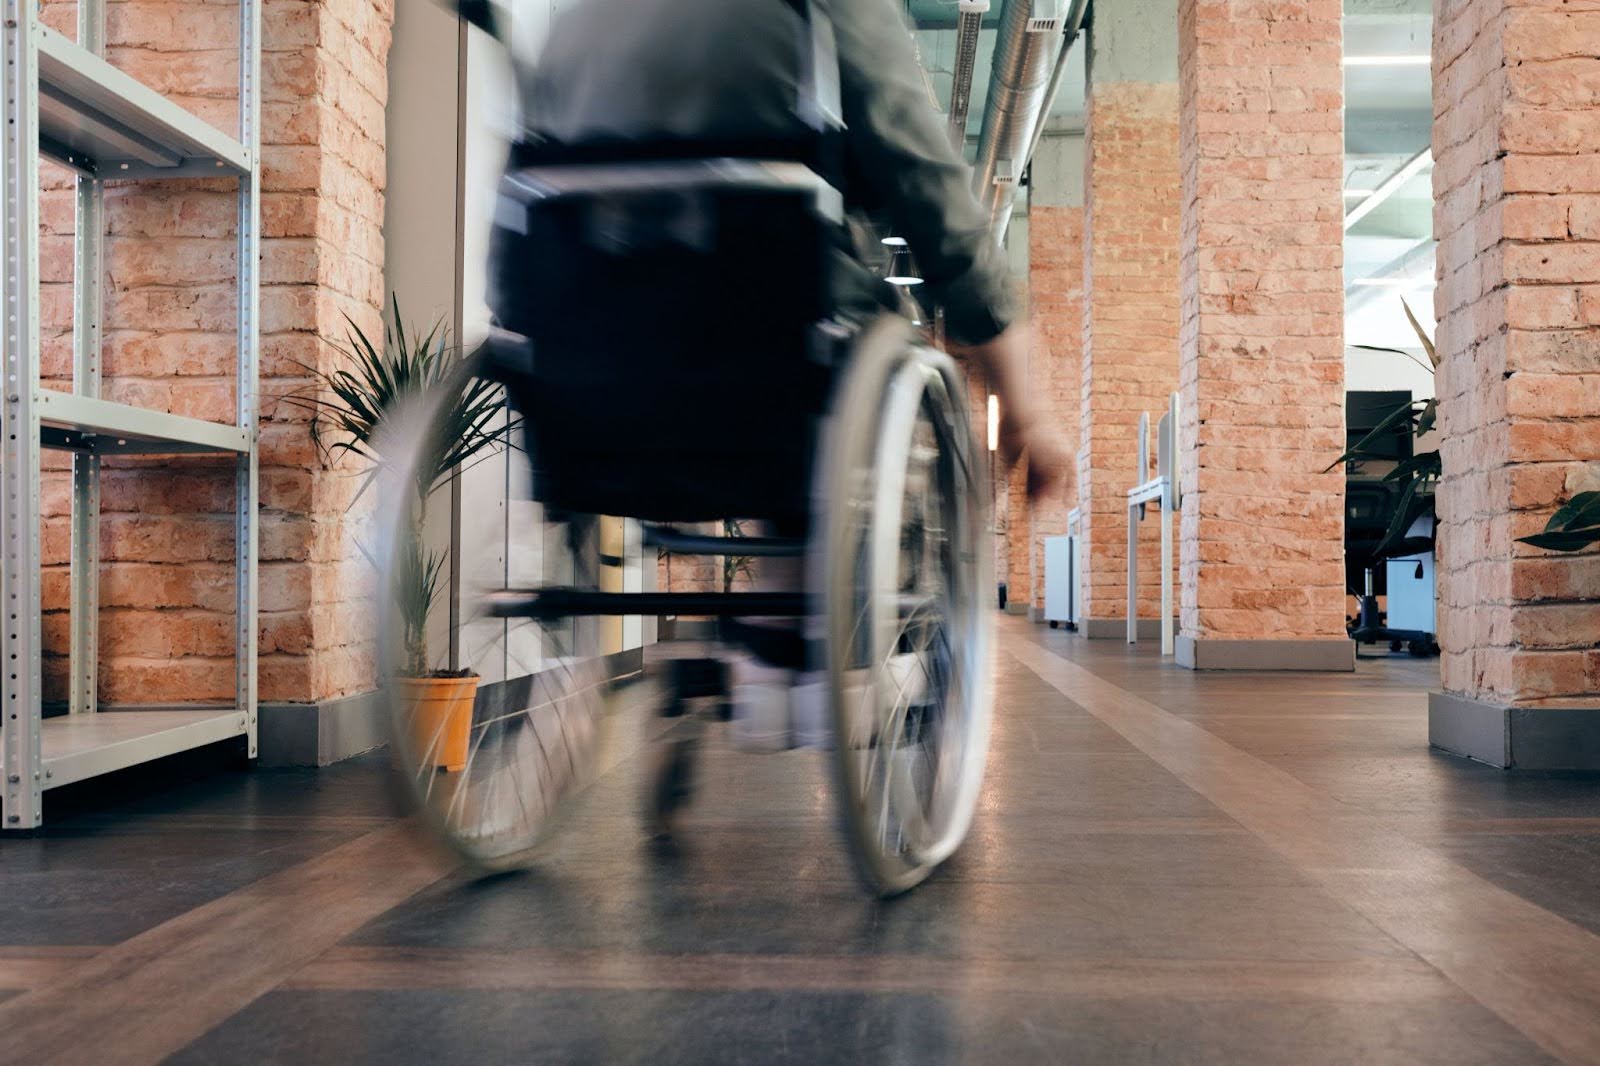 An action shot of someone in a wheelchair